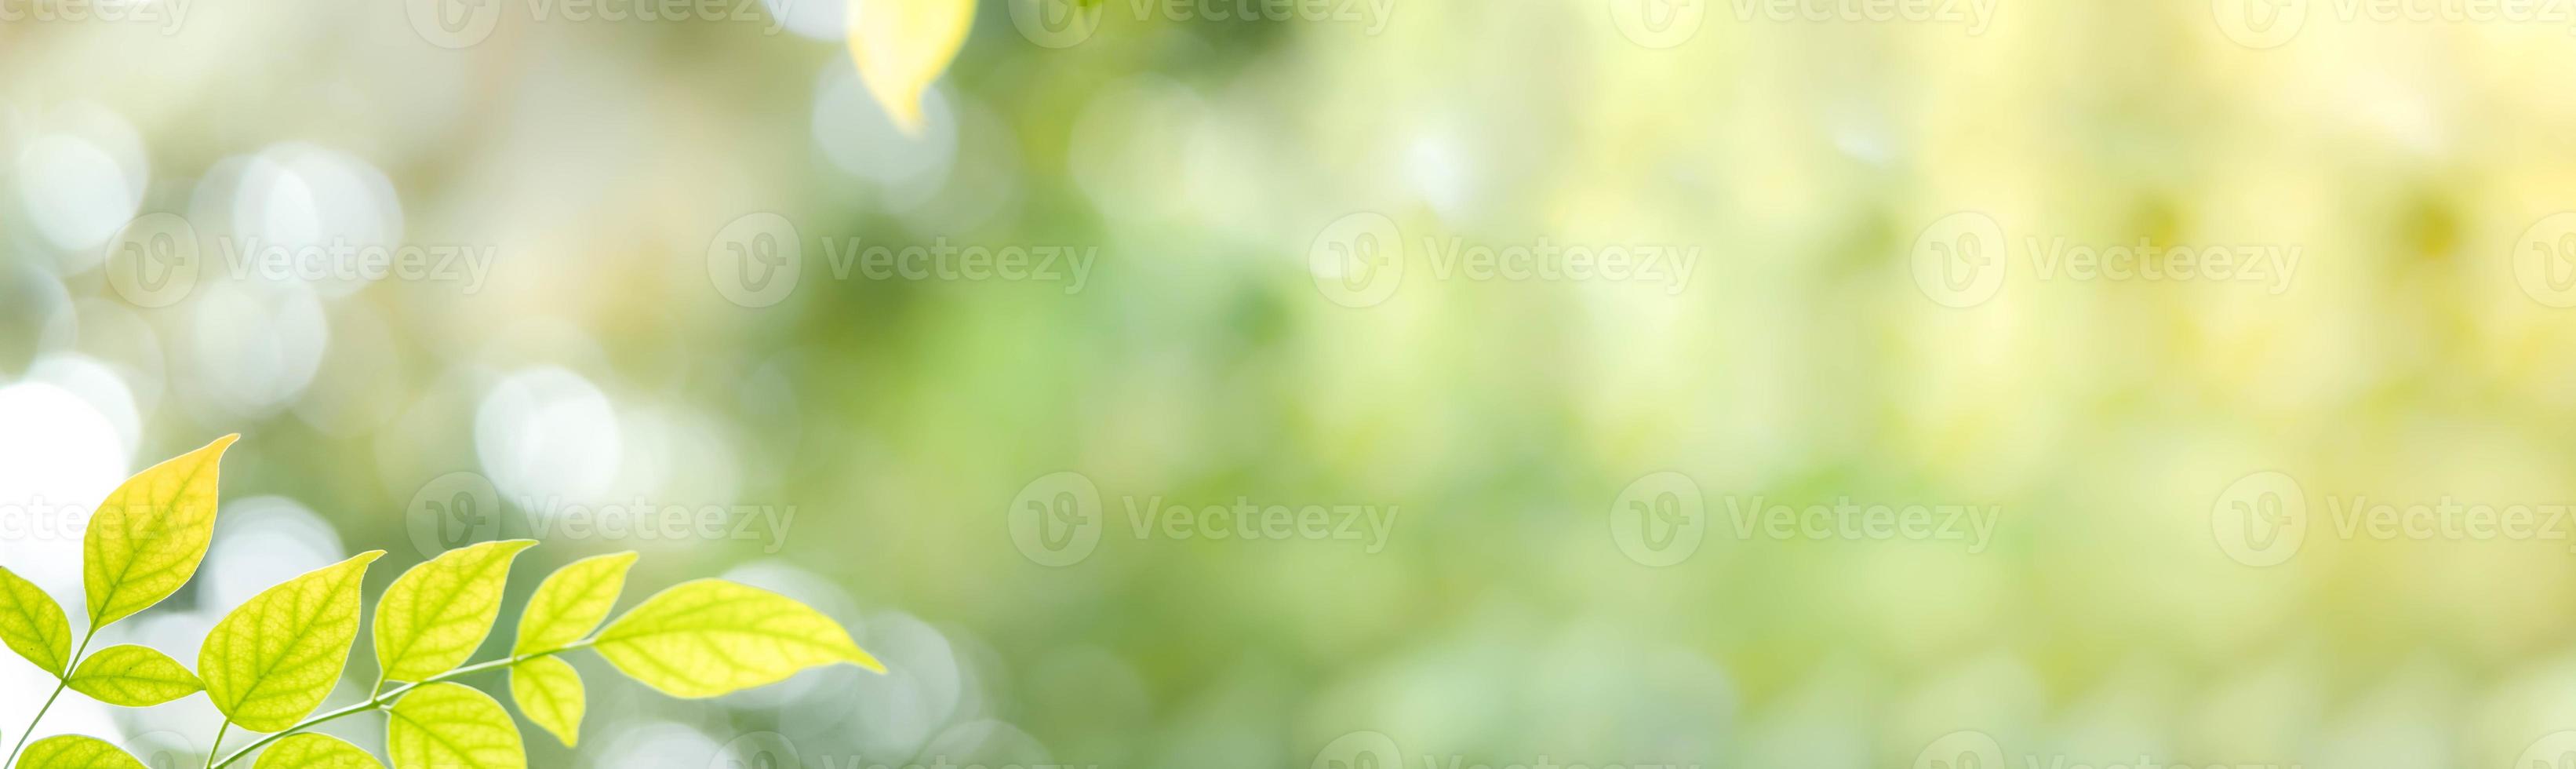 Gorgeous nature view of green leaf on blurred greenery background in garden. Natural green leaves plants used as spring background cover page greenery environment ecology lime green wallpaper photo